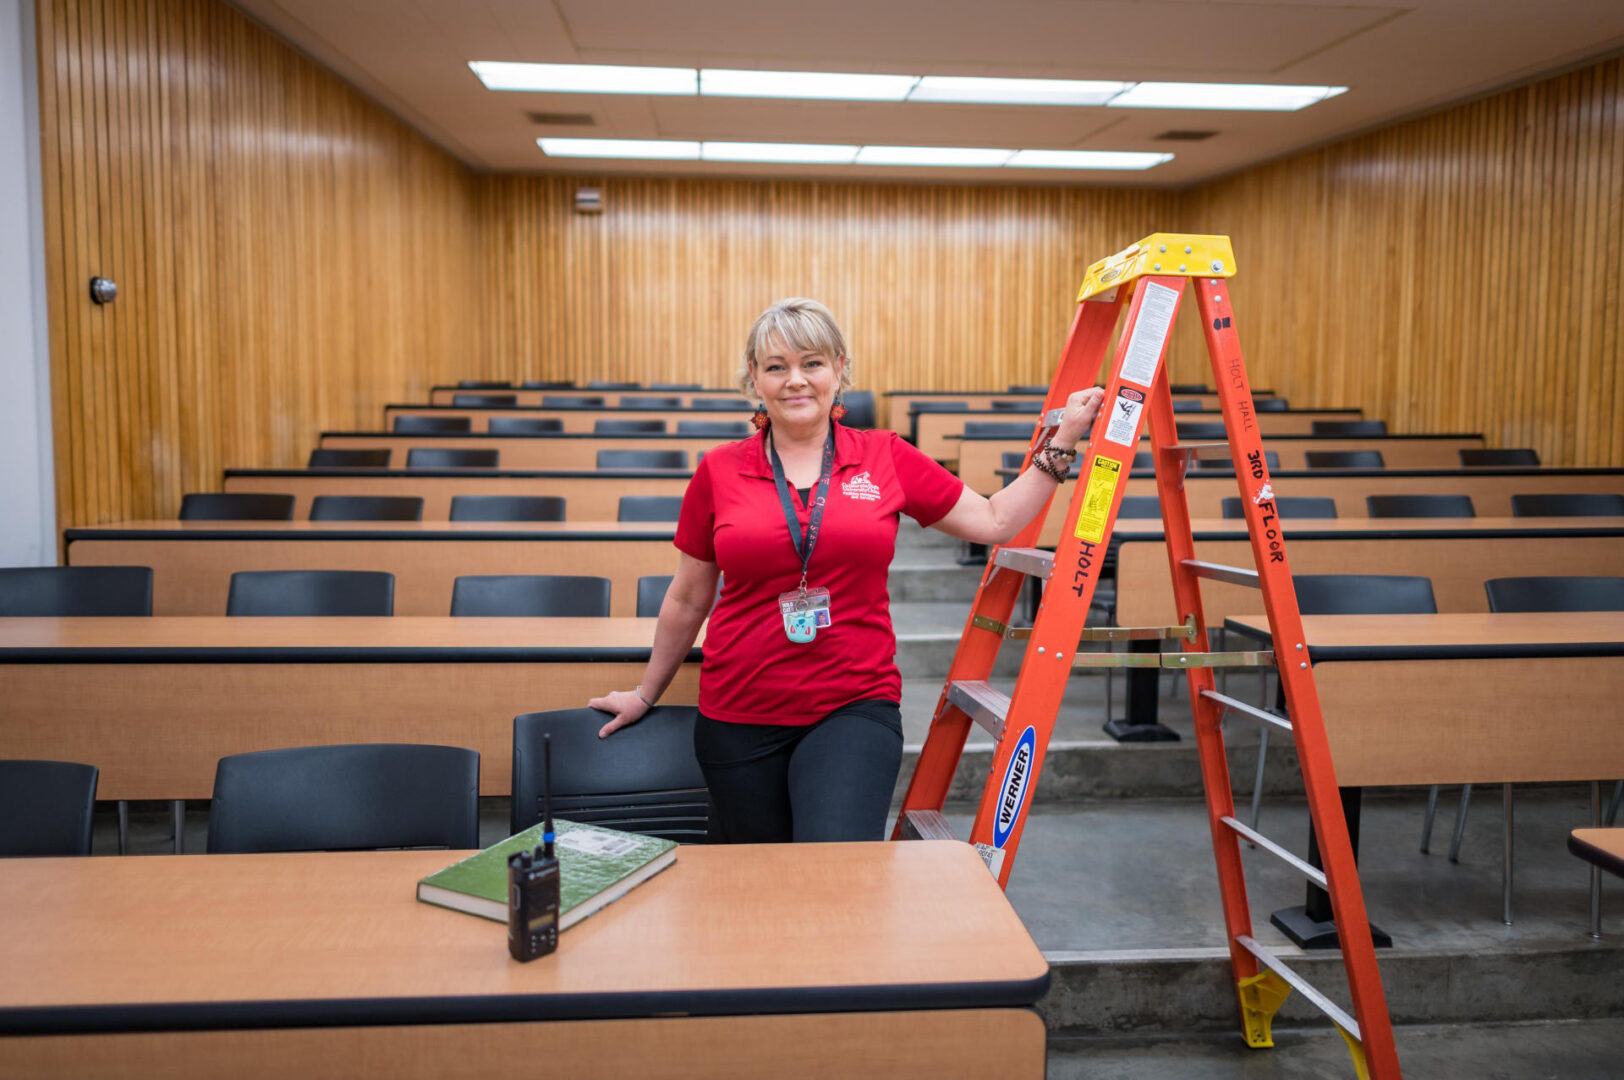 Lore leans her arm on a ladder inside a college classroom